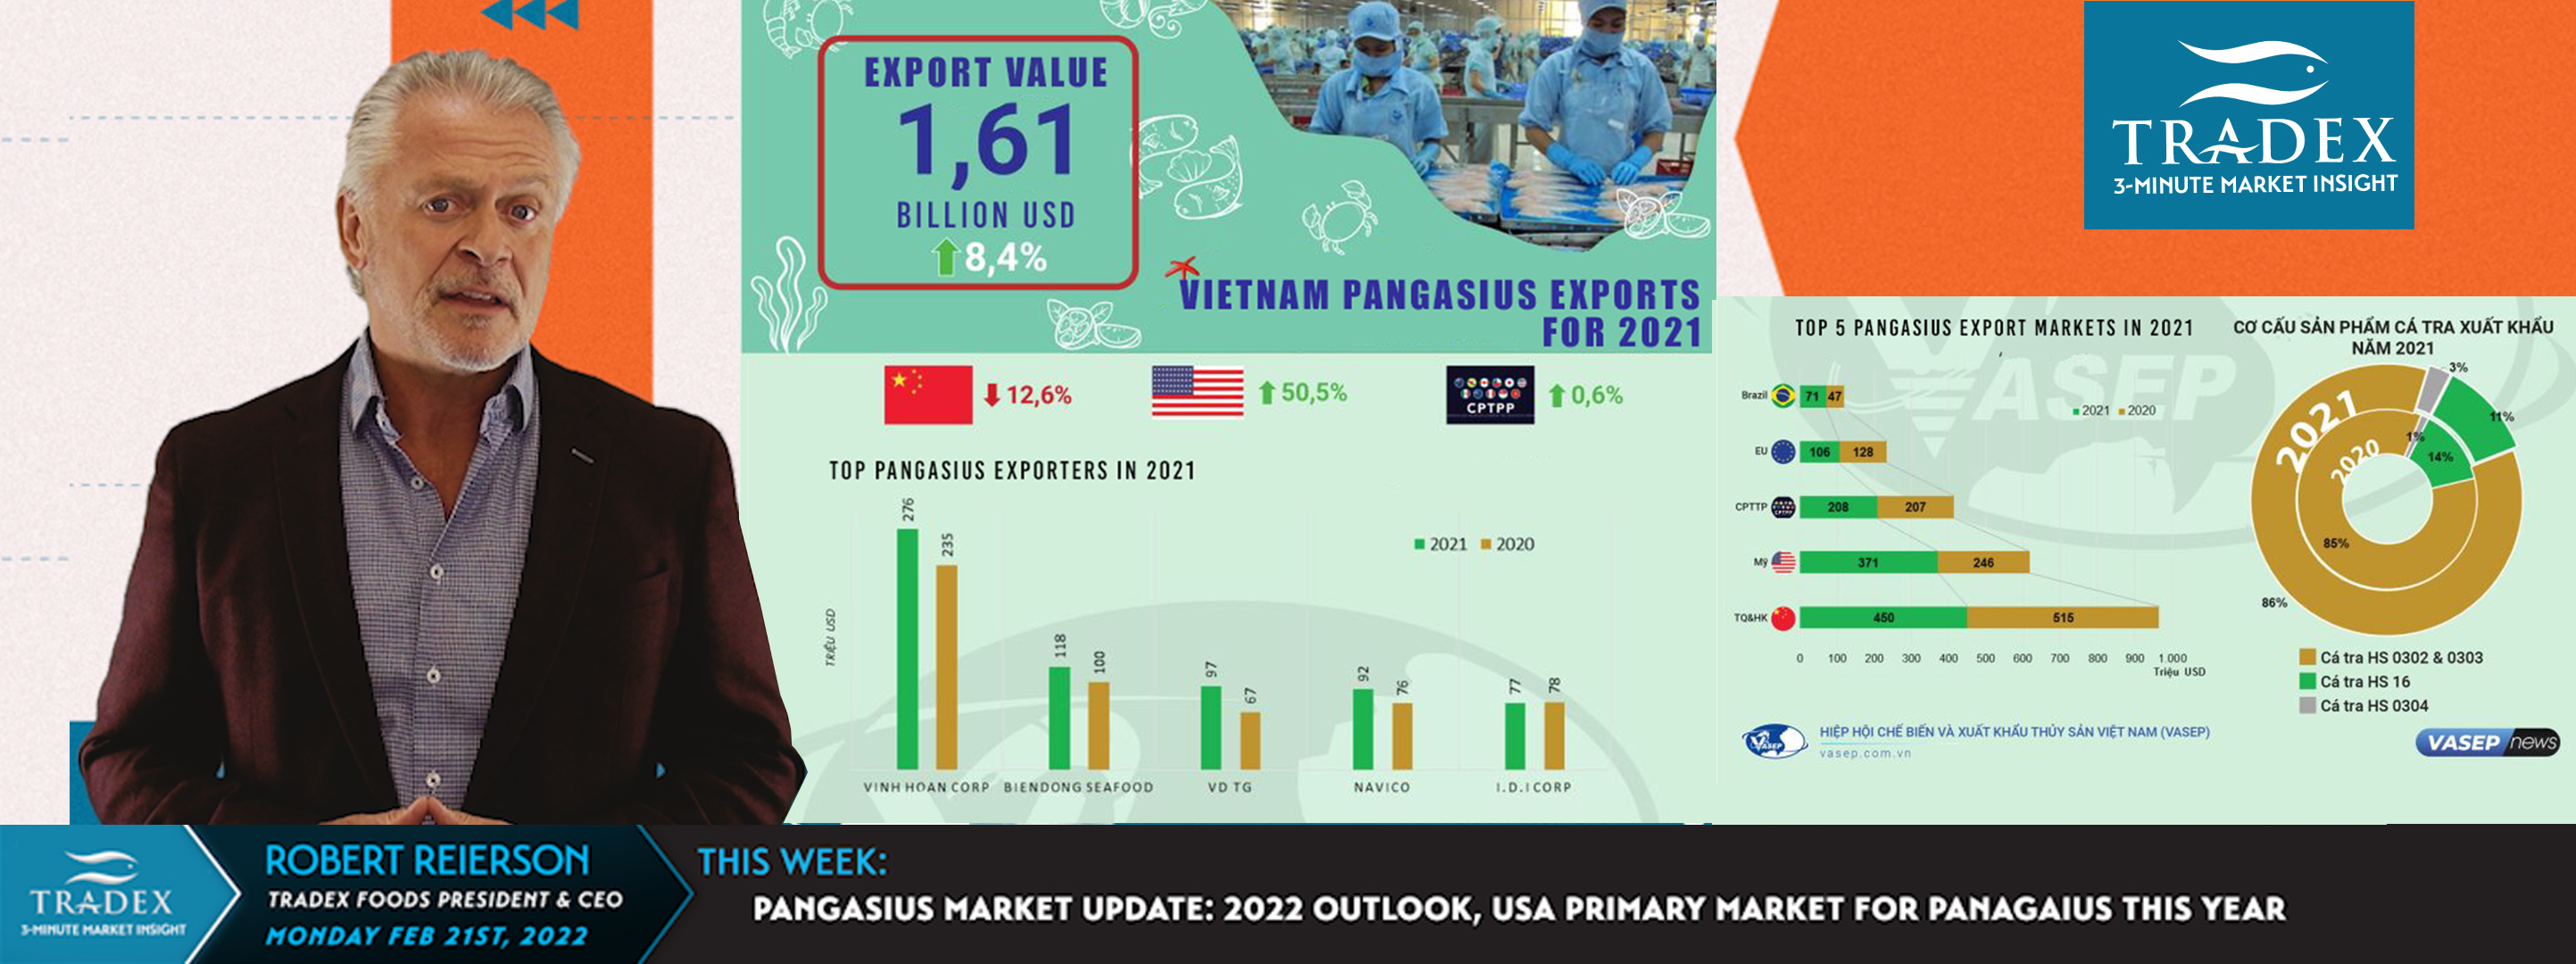 Pangasius Market Update: 2022 Outlook, USA Primary Market for Panagasius This Year